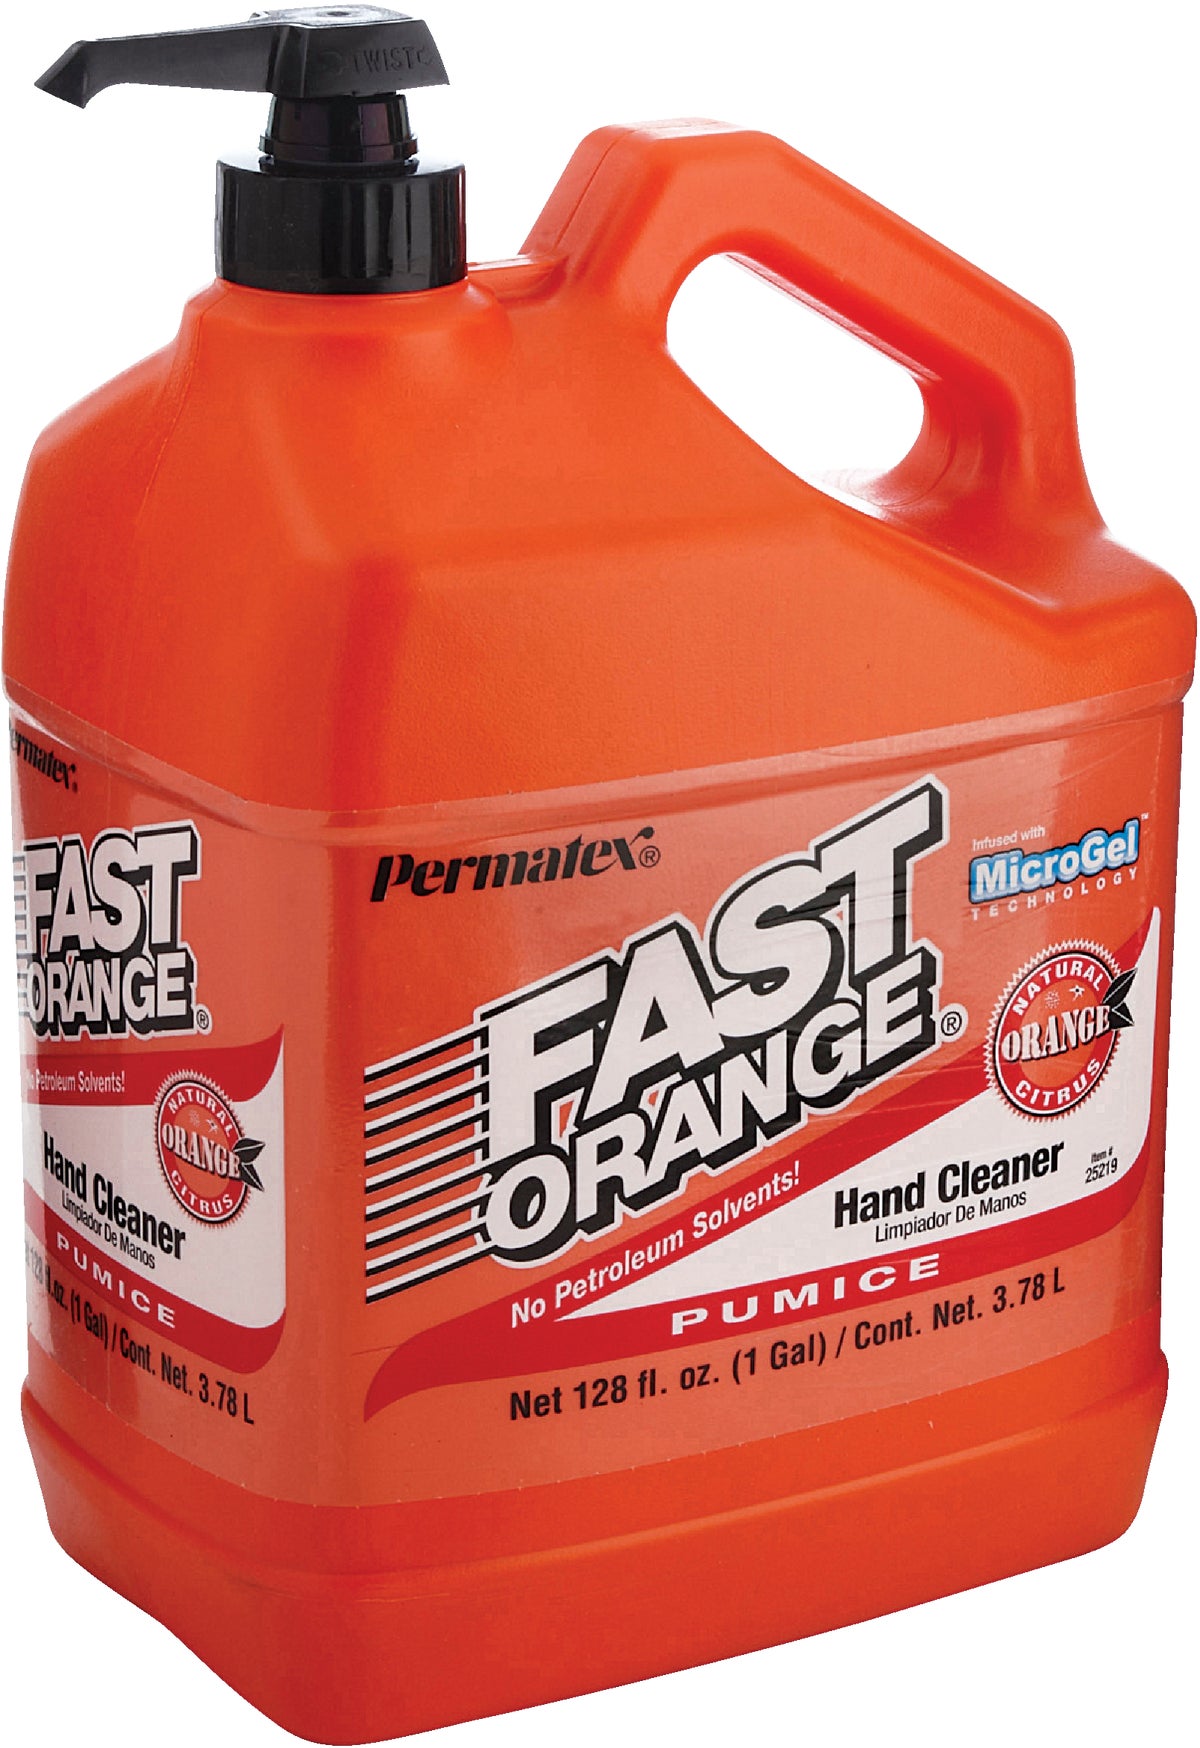 Permatex Fast Orange Smooth Lotion Hand Cleaners, Citrus, Bottle w